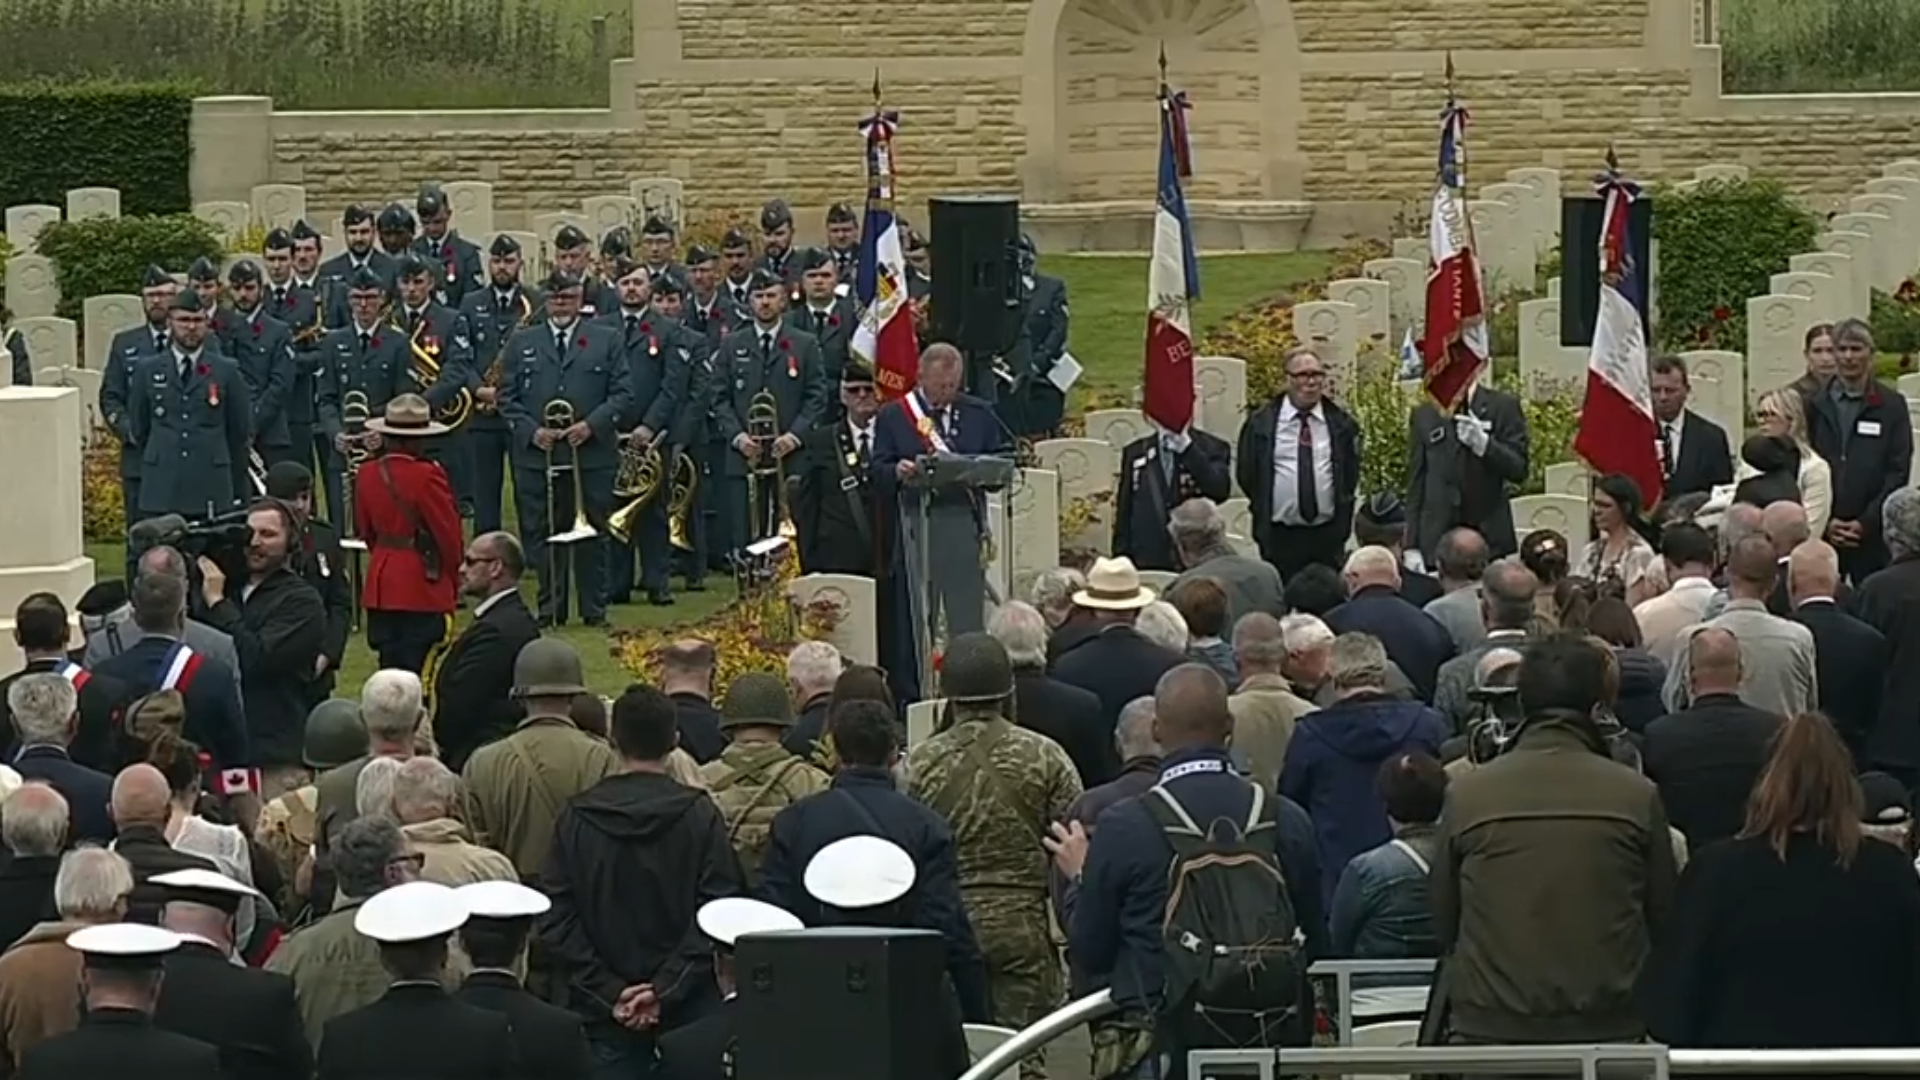 Canadian veterans gather in France ahead of D-Day